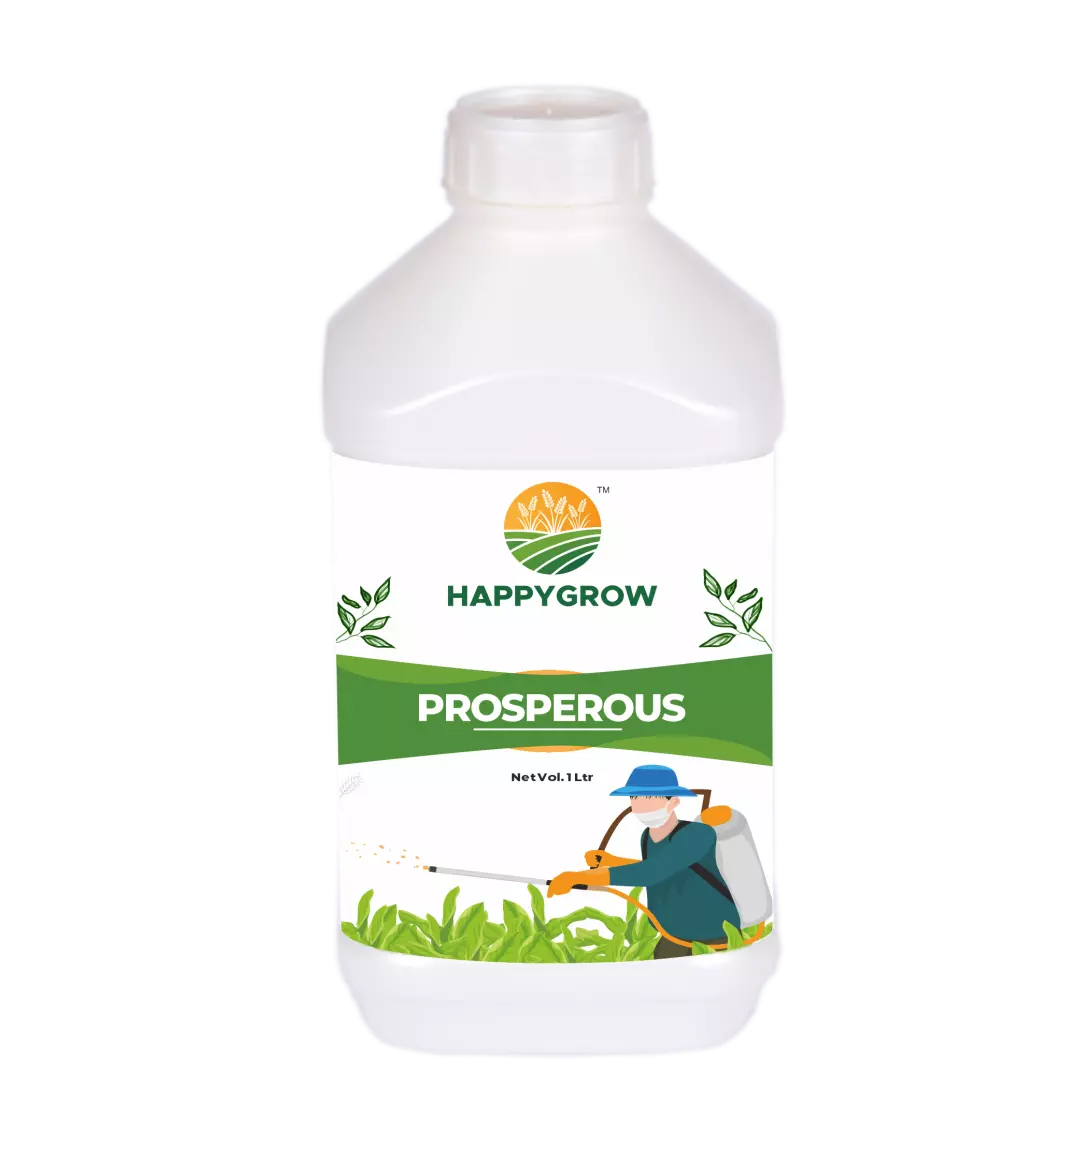 Prosperous - Growth Promoter: high-quality organic manure for agriculture